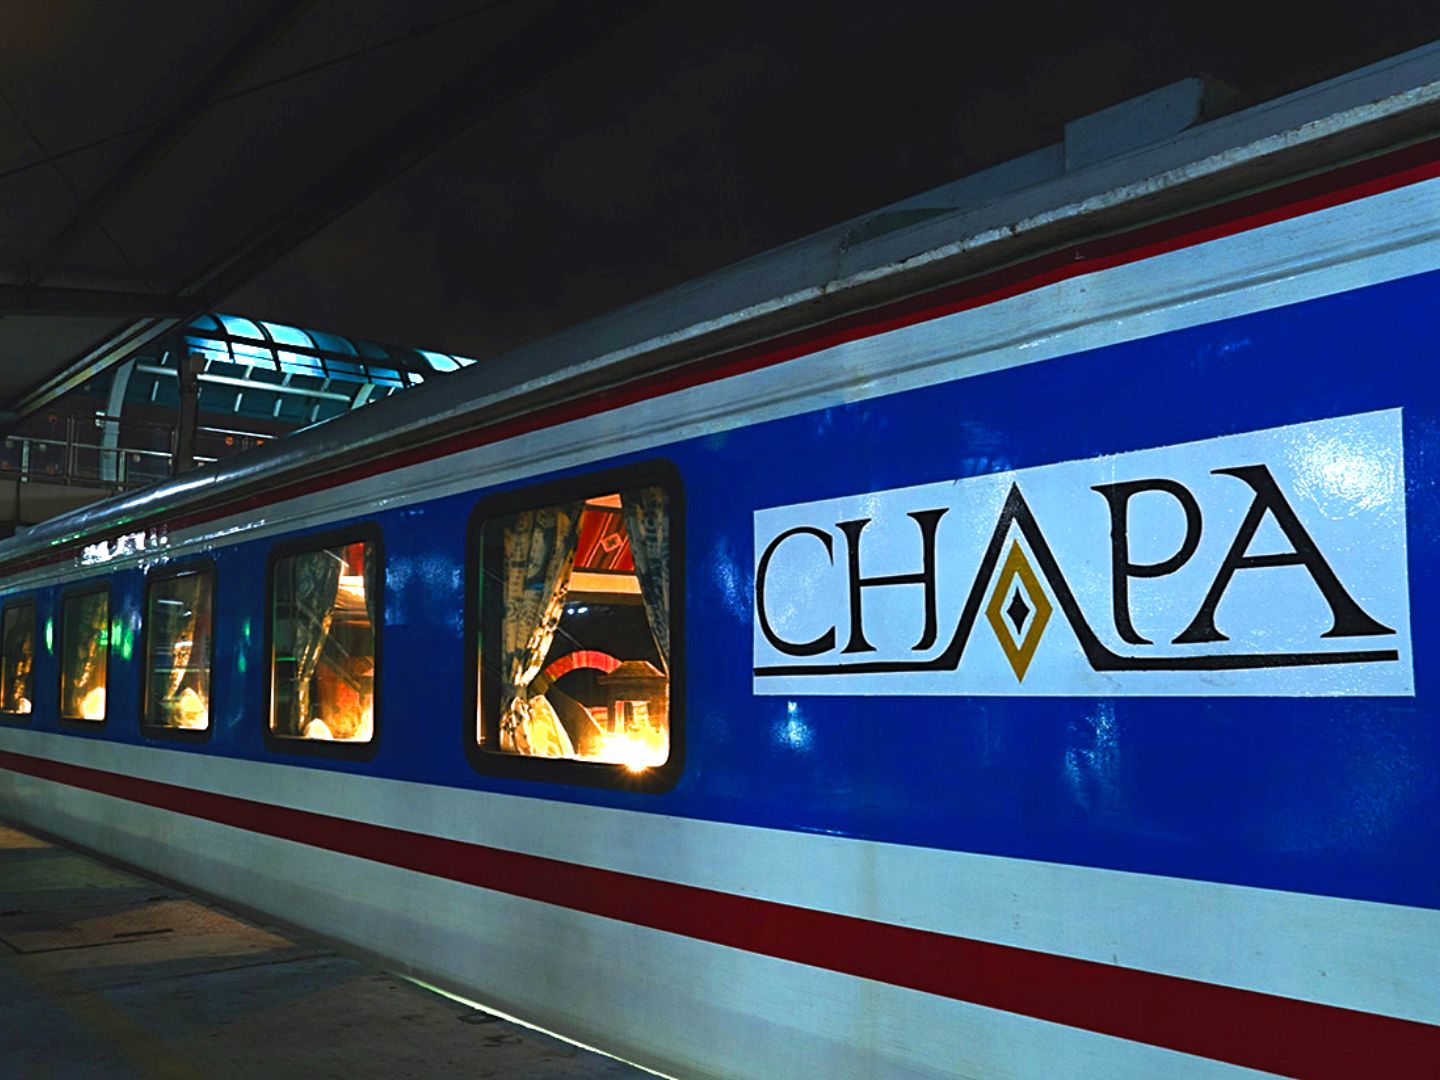 Savor the journey on Chapa Express train route